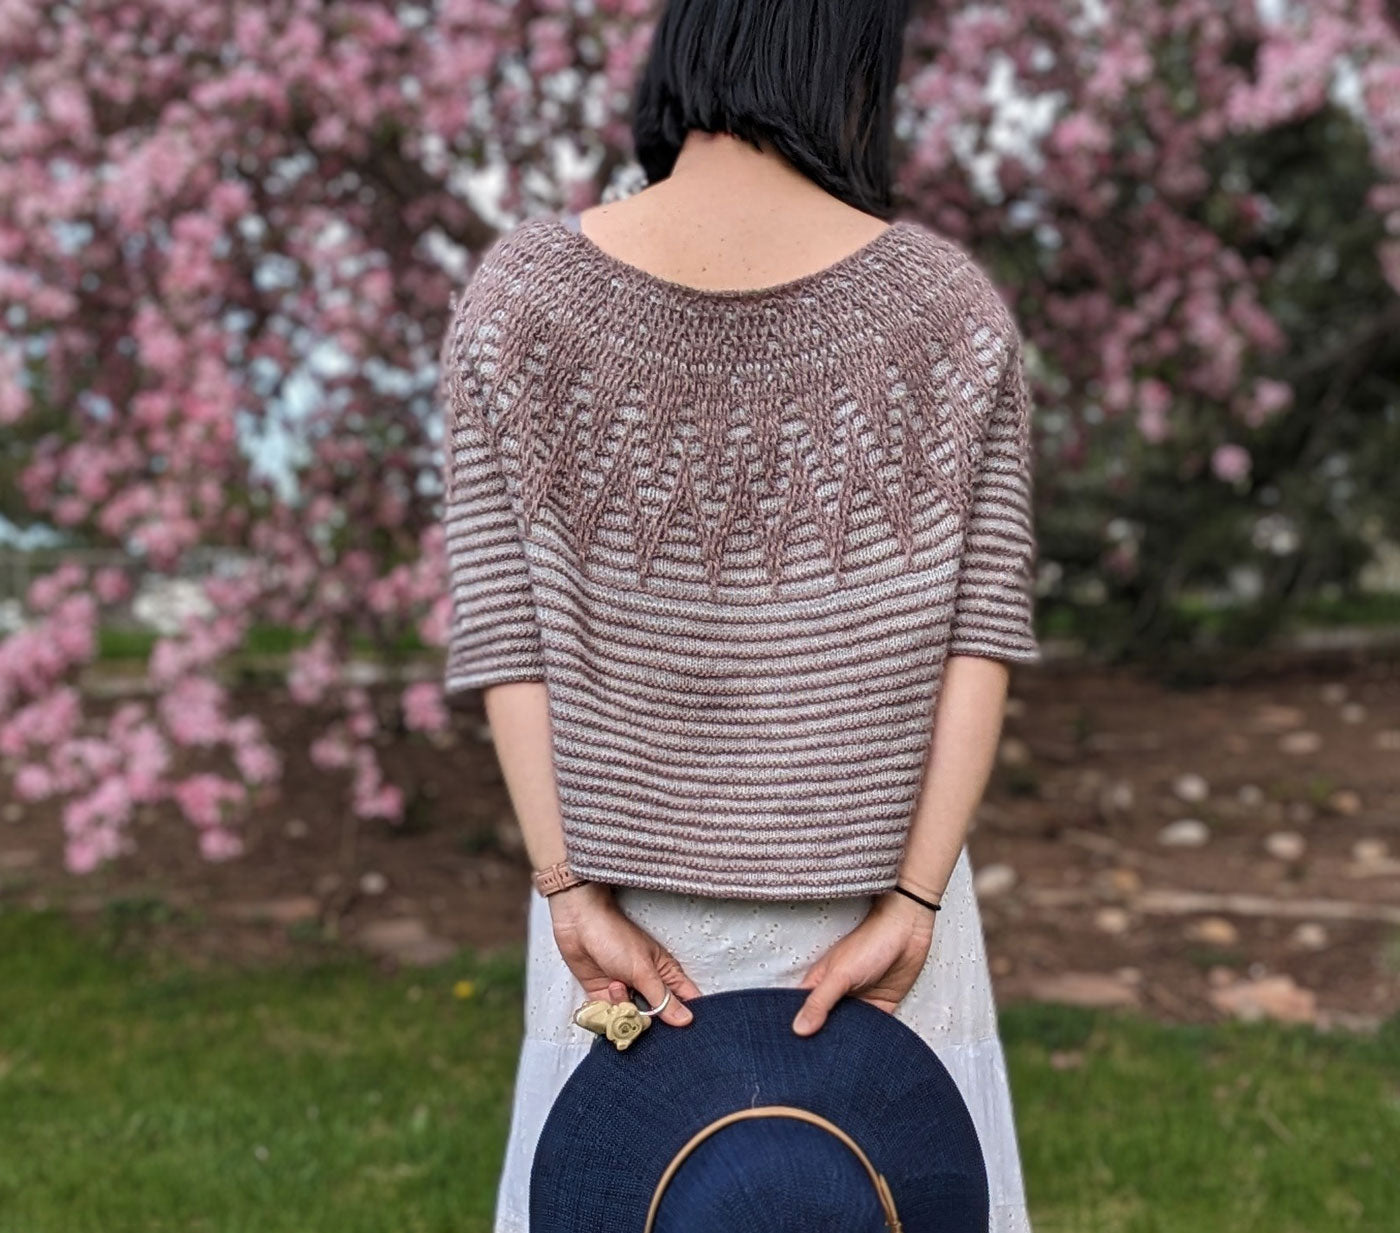 This a close up shot of the back of Connie's Aubade sweater. She holds a navy wide prim hat in her hands.